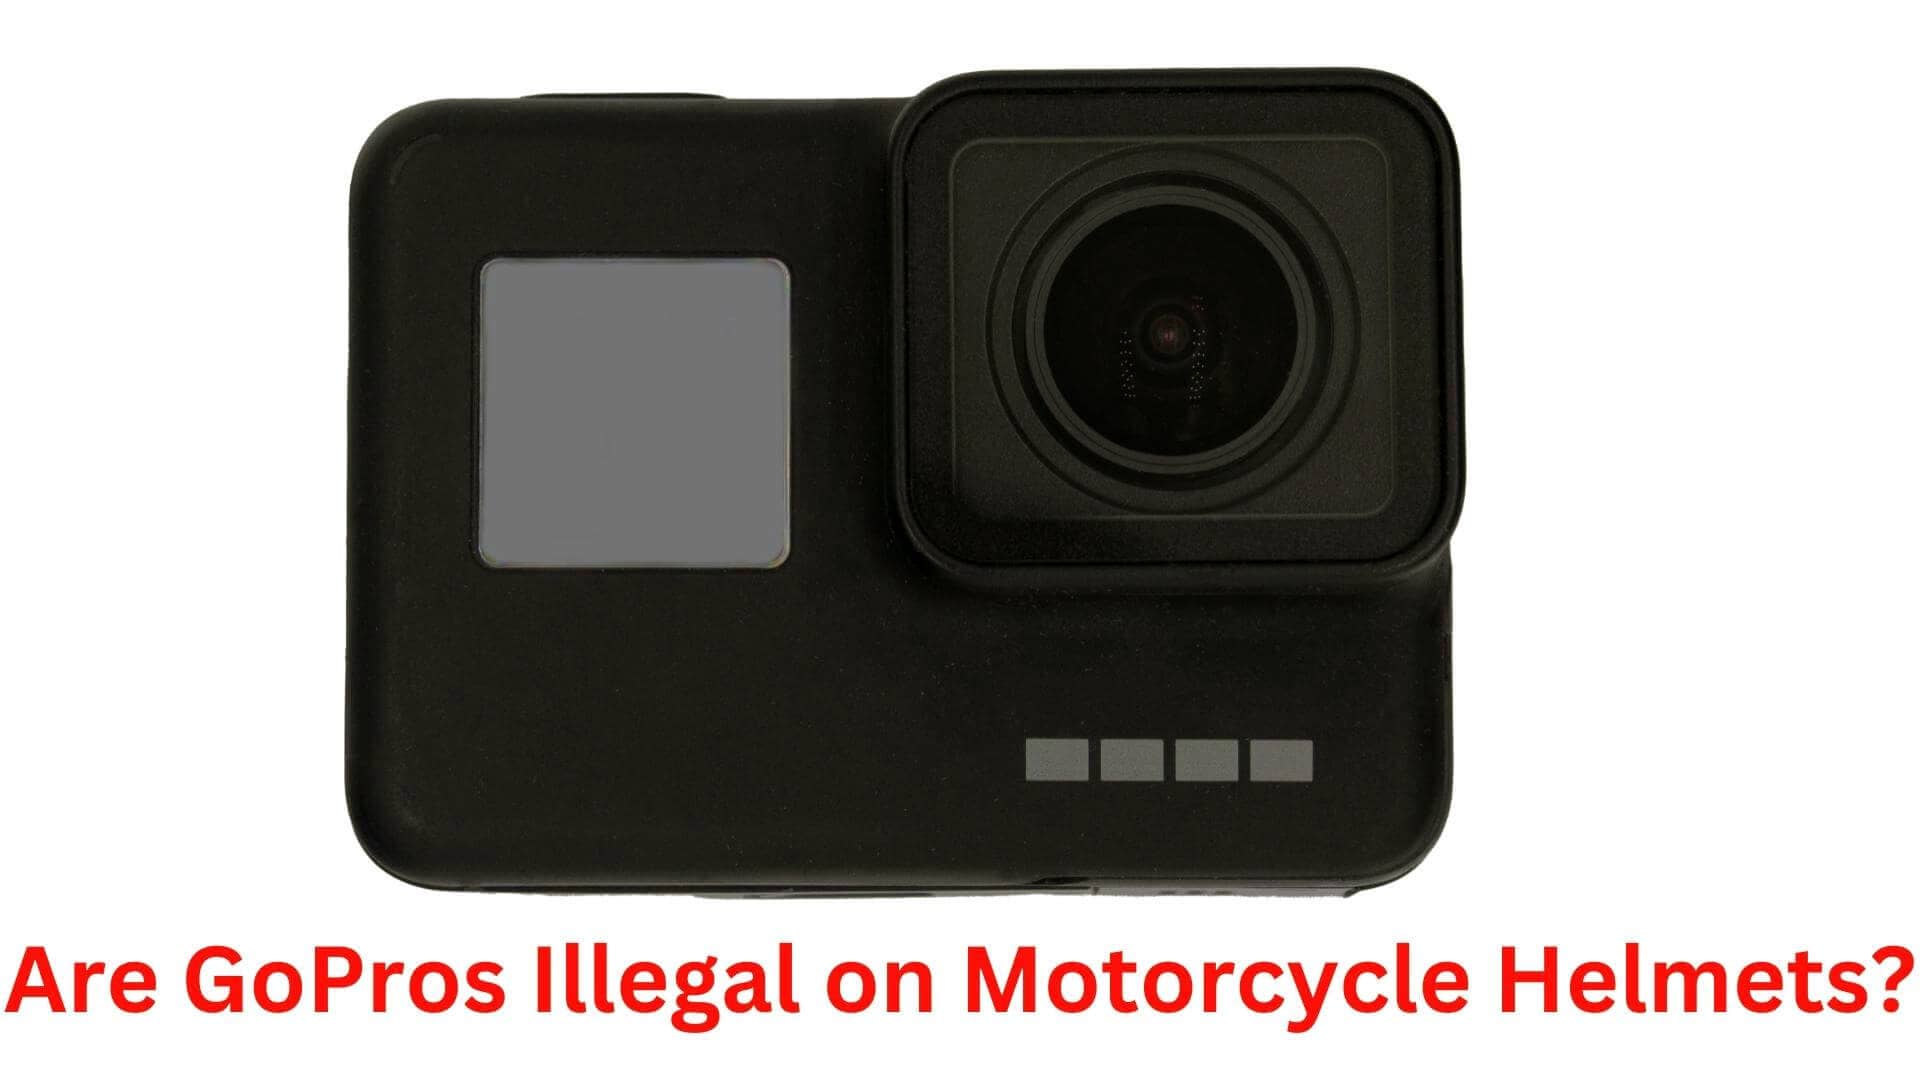 are gopros illegal on motorcycle helmets